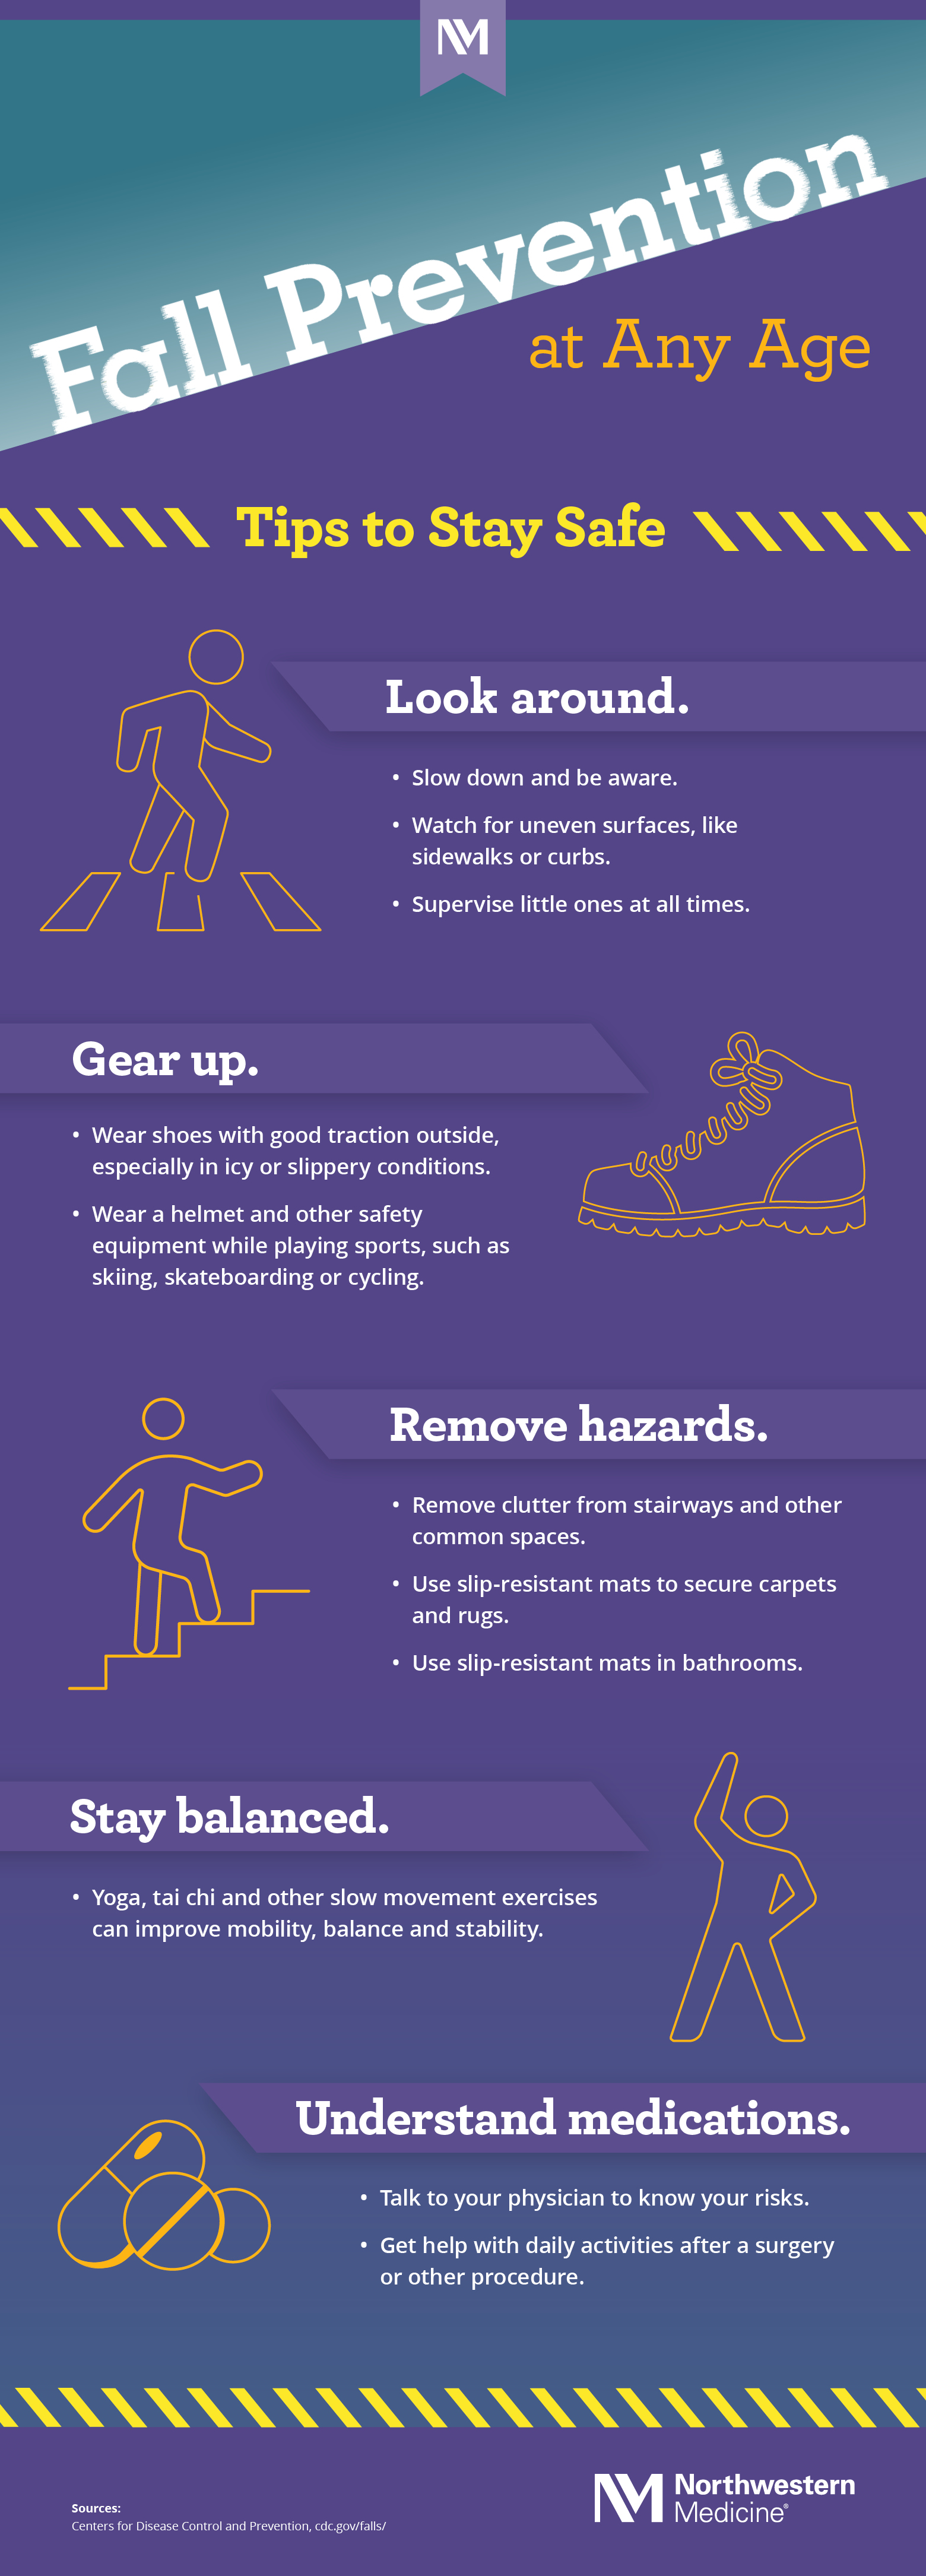 Infographic with headline "Fall Prevention at Any Age" and subheading Tips to Stay Safe.